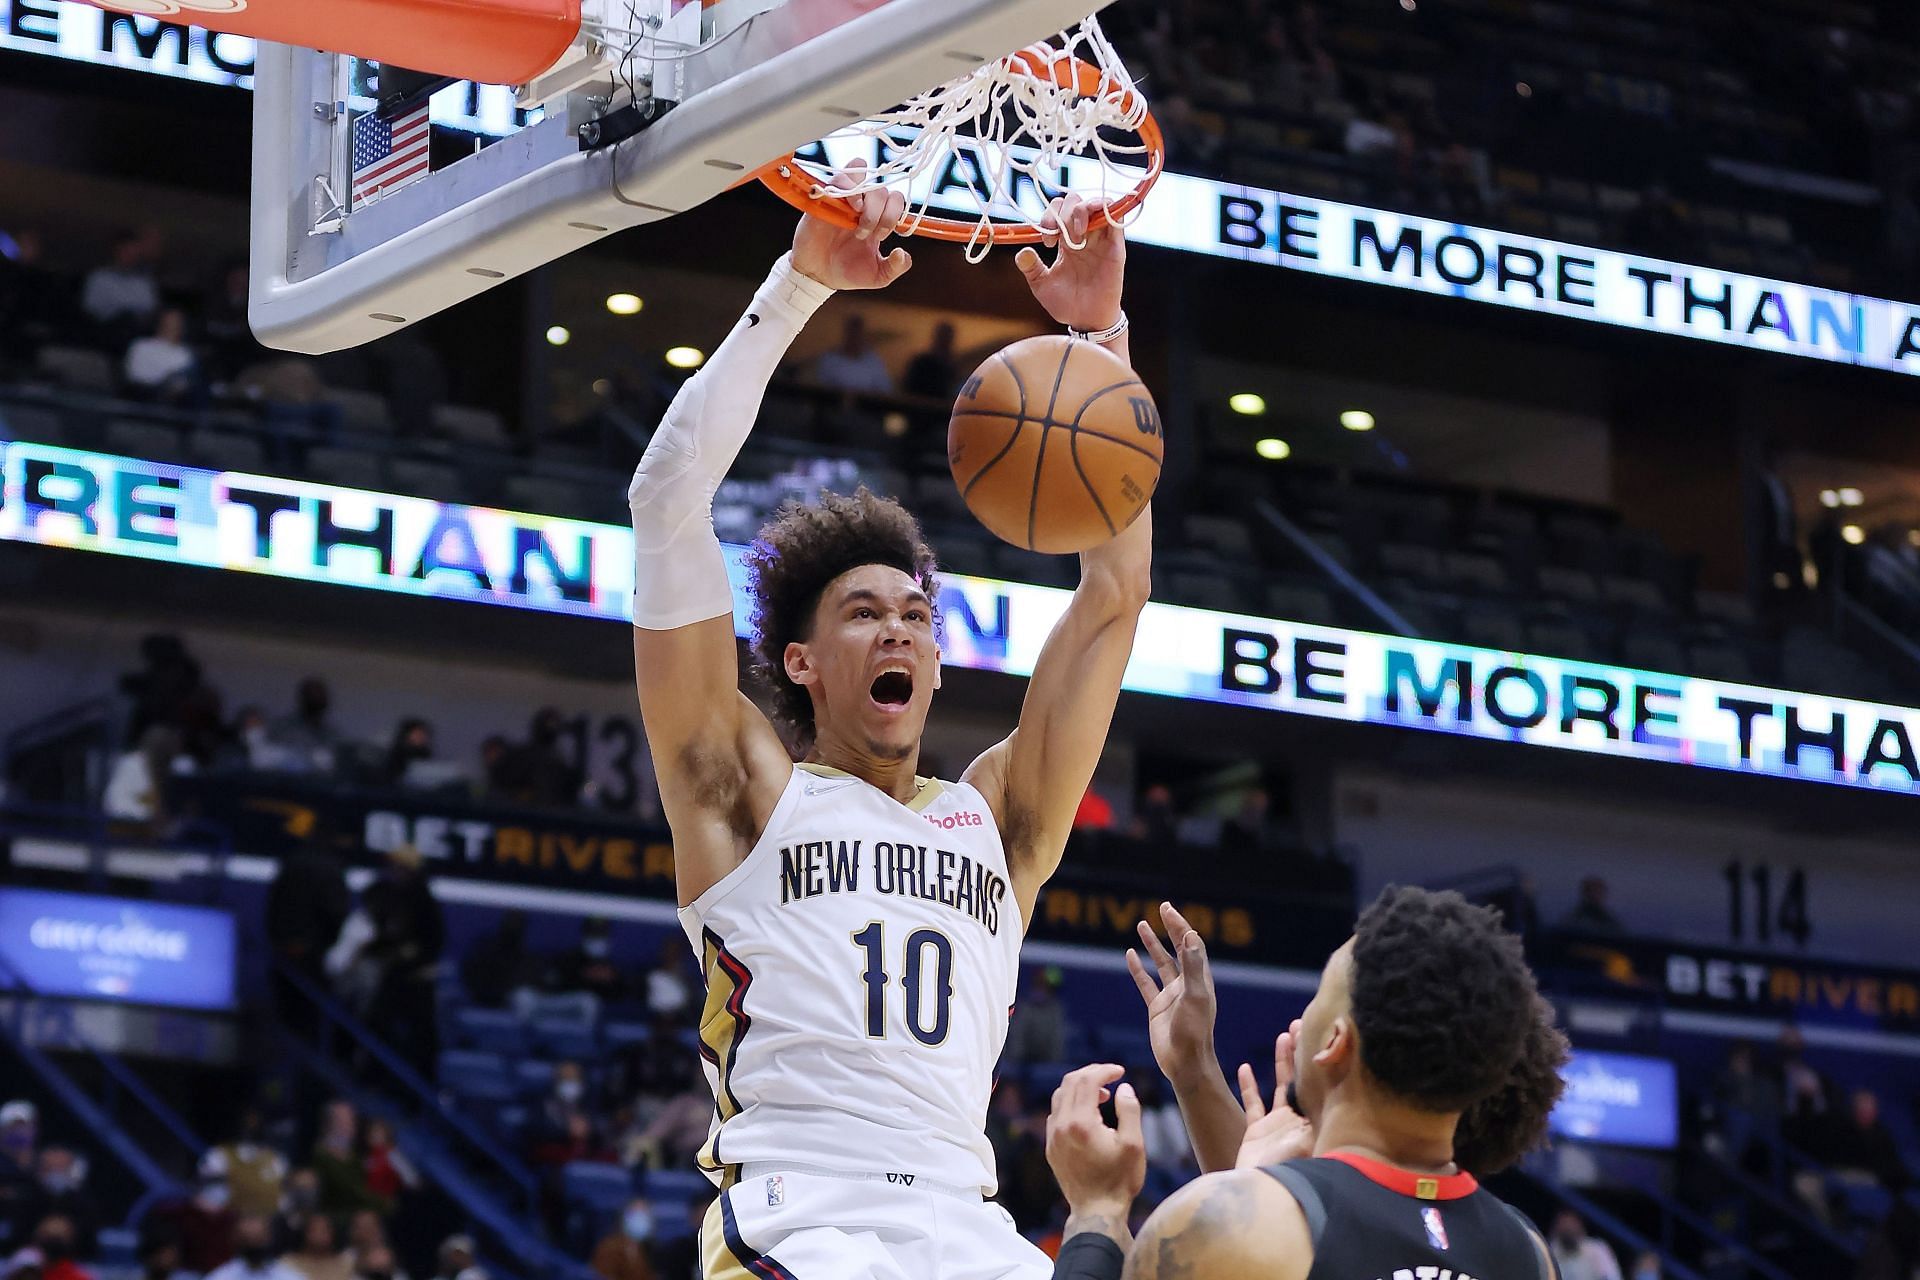 Jaxson Hayes of the New Orleans Pelicans dunks as Kenyon Martin Jr. of the Houston Rockets defends.